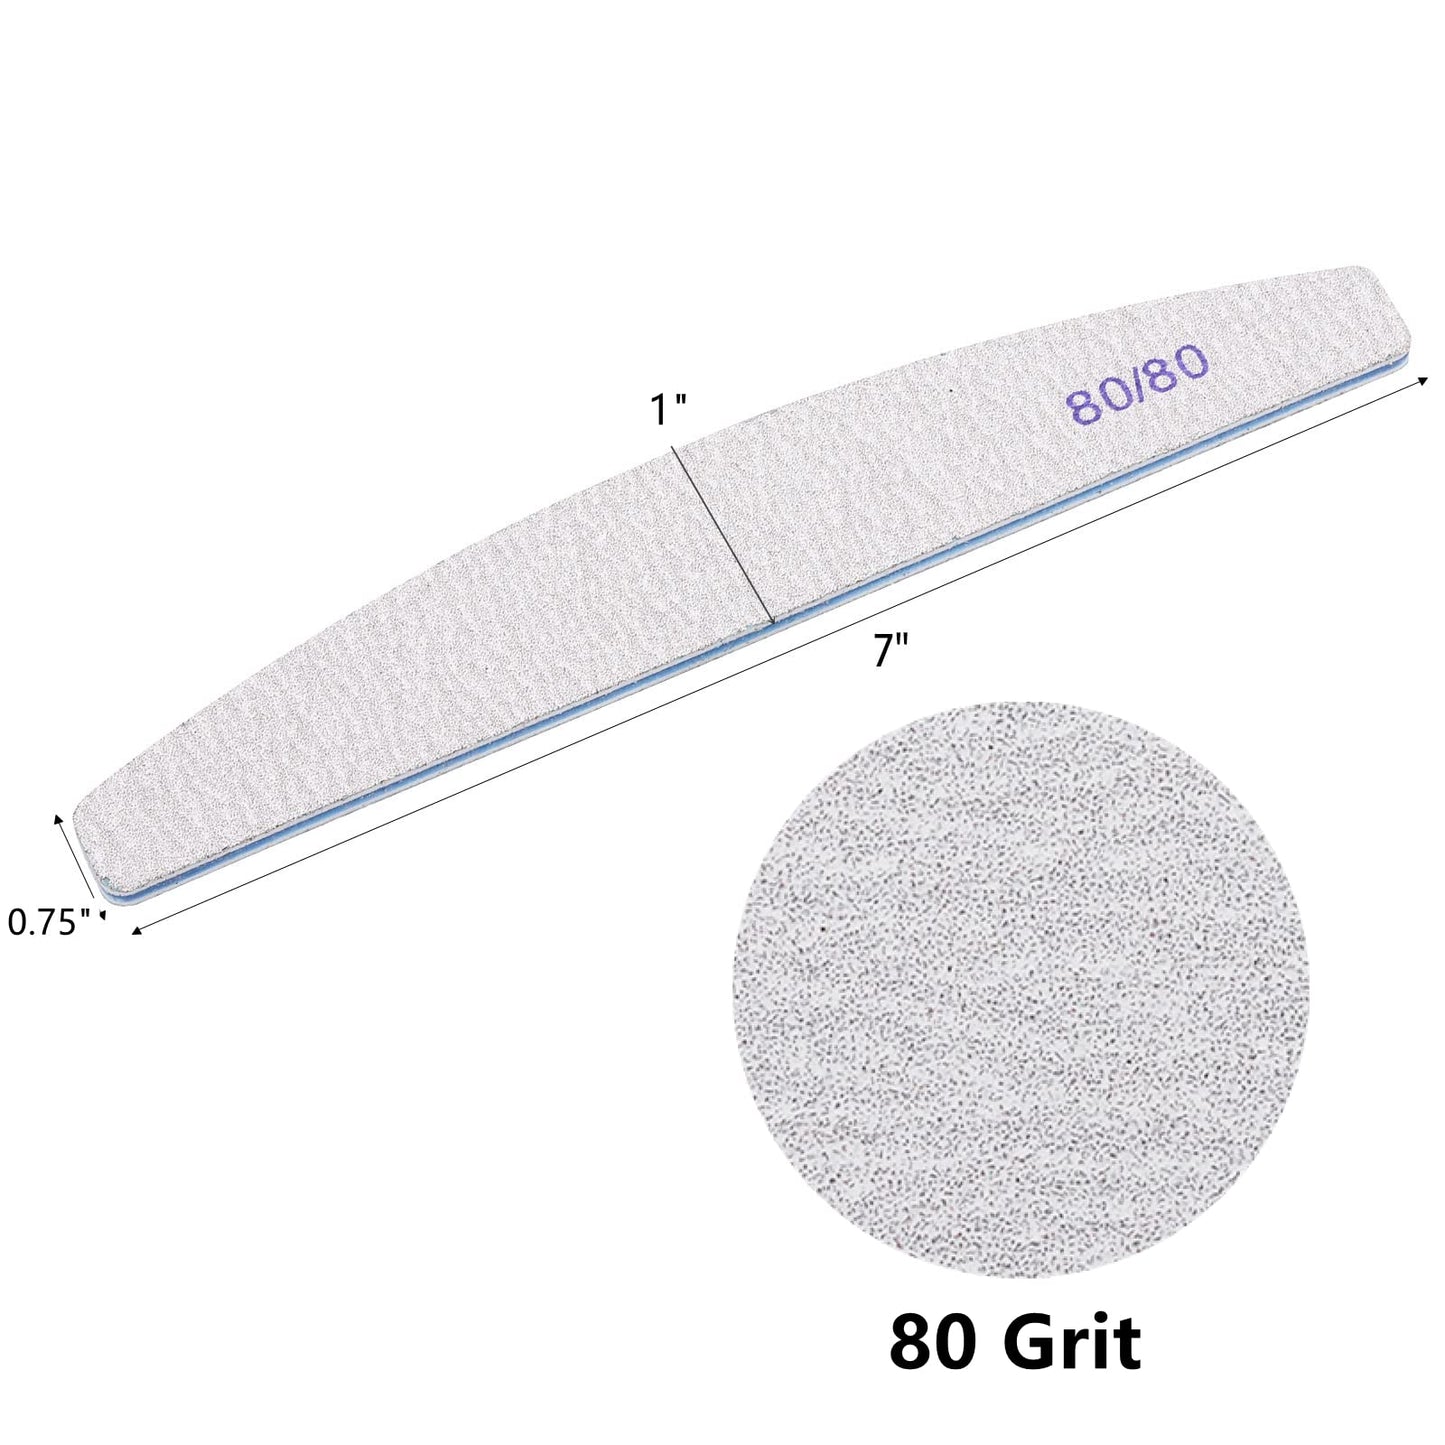 50 Count 80/80 Grit Nail Files for Acrylic Nails, Coarse Grit Emery Boards Professional Nail Files Set